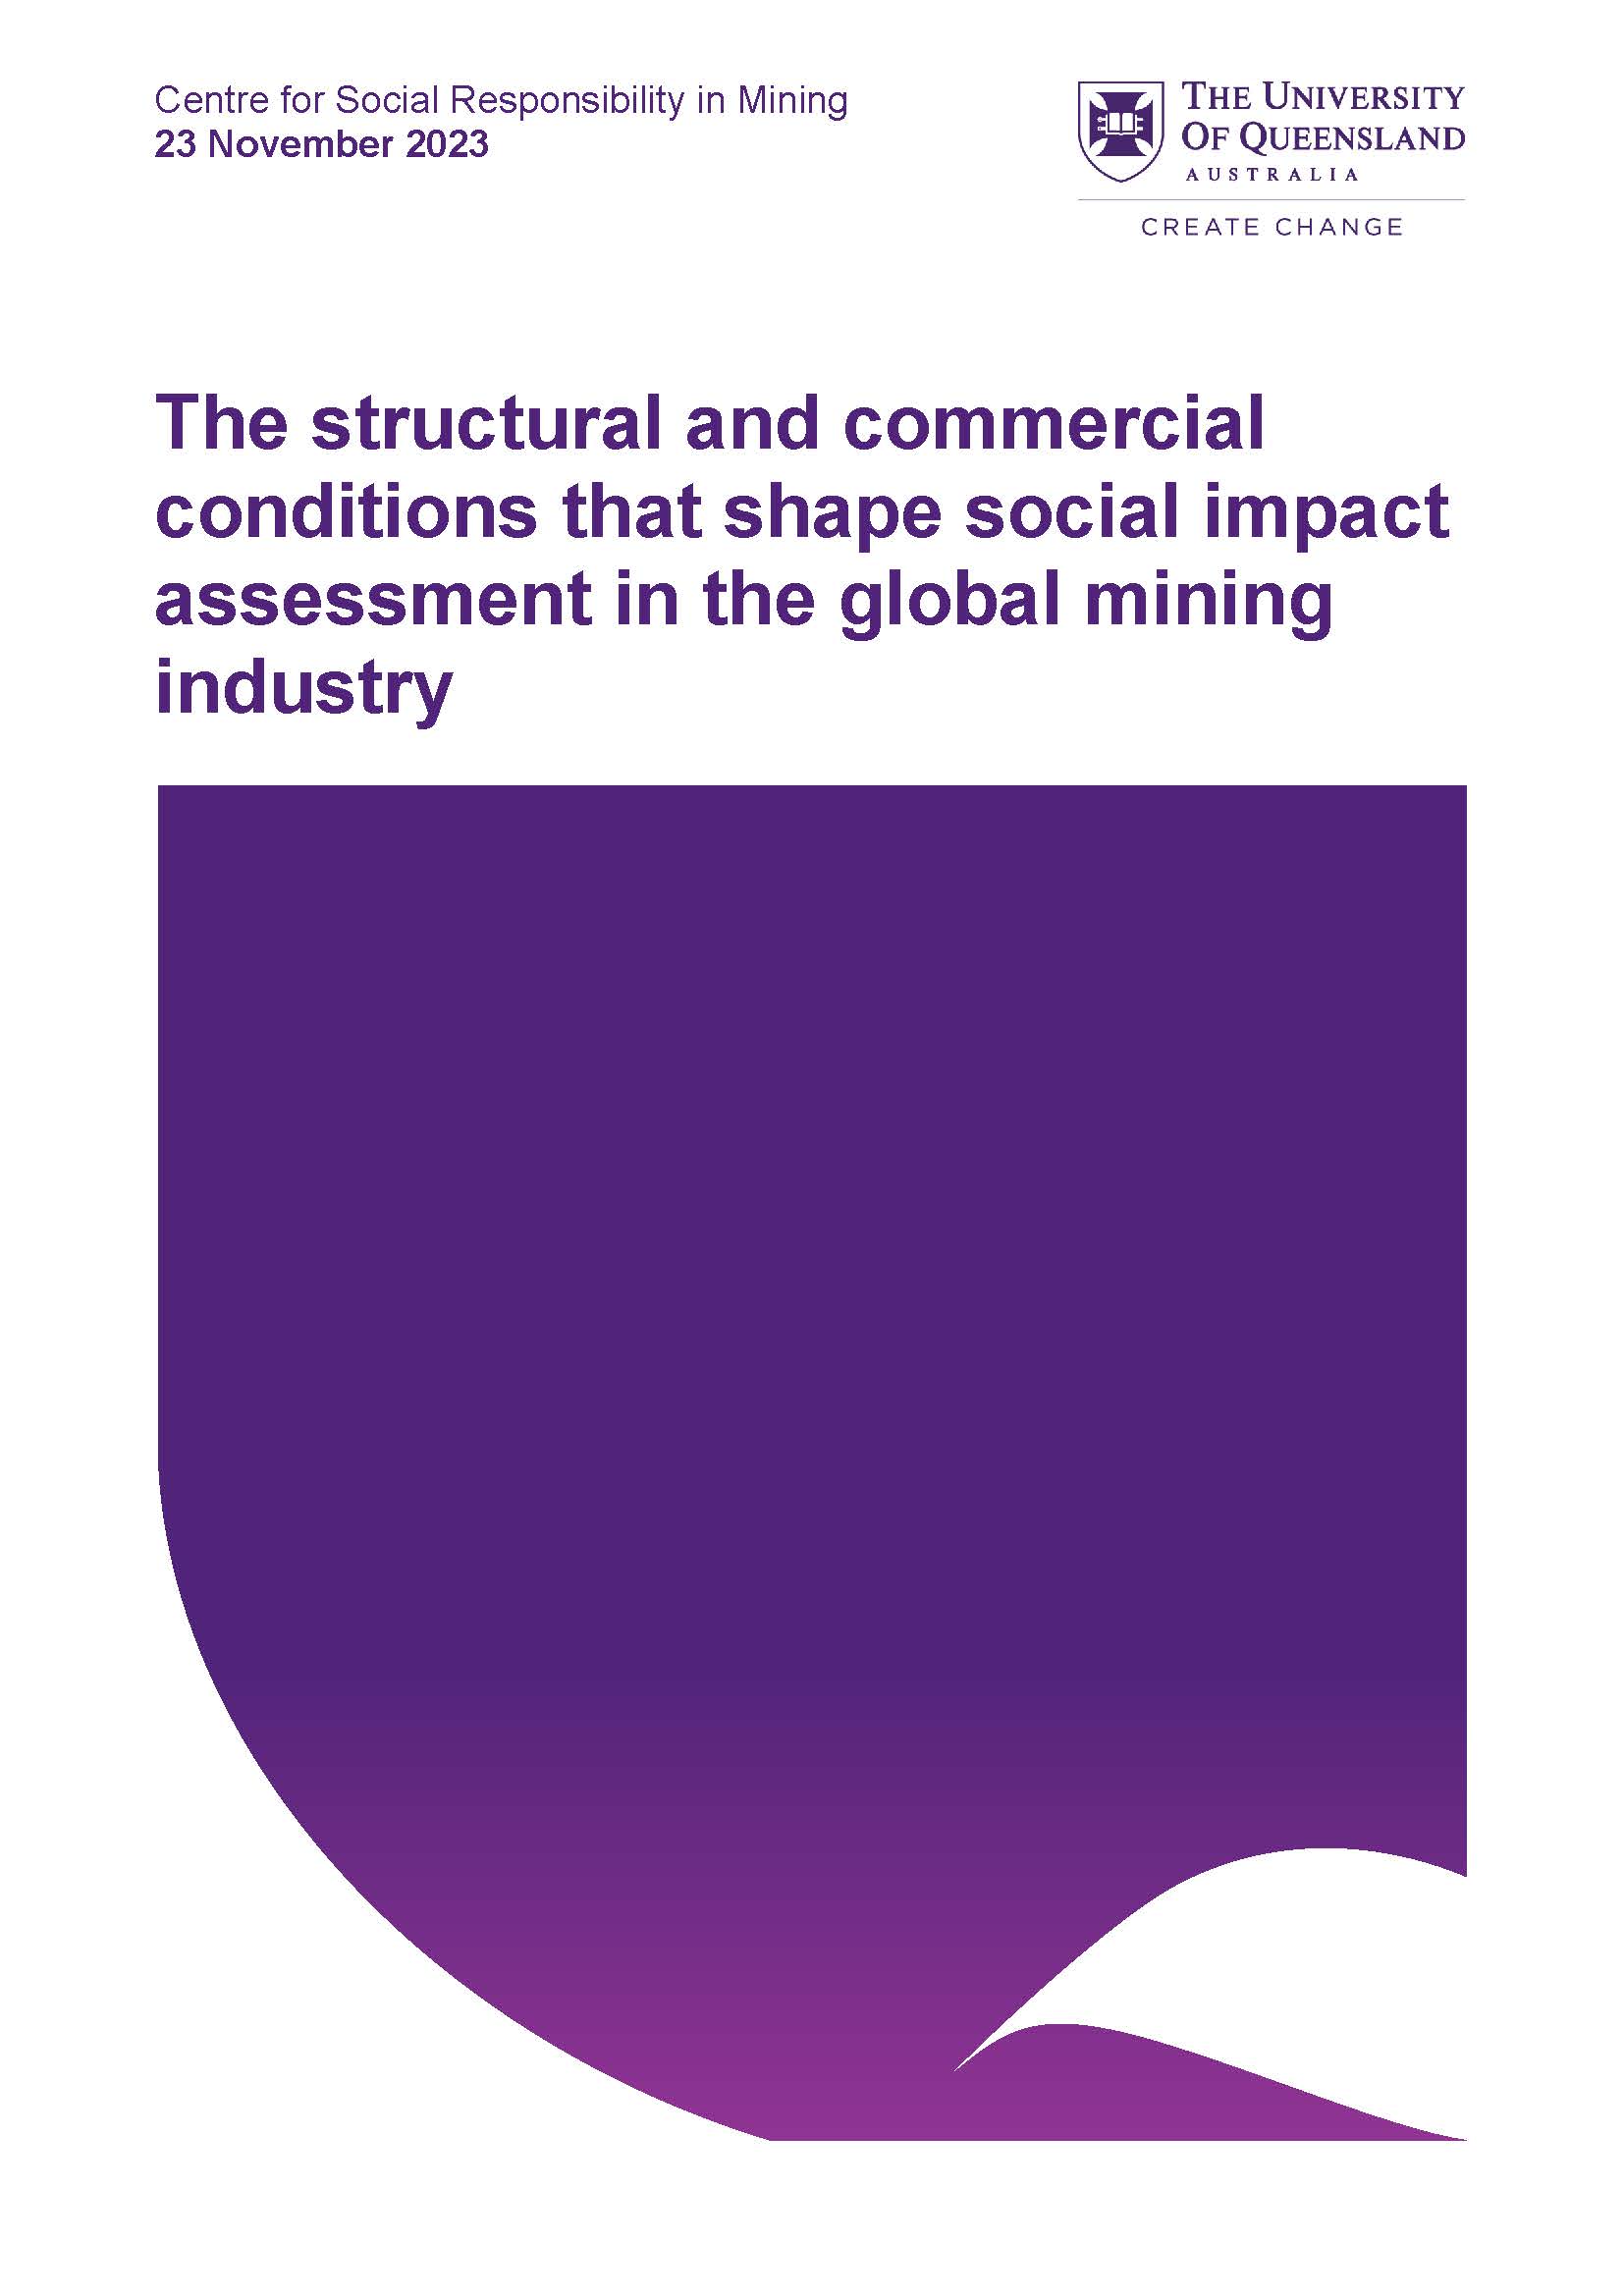 The structural and commercial conditions that shape social impact assessment in the global mining industry